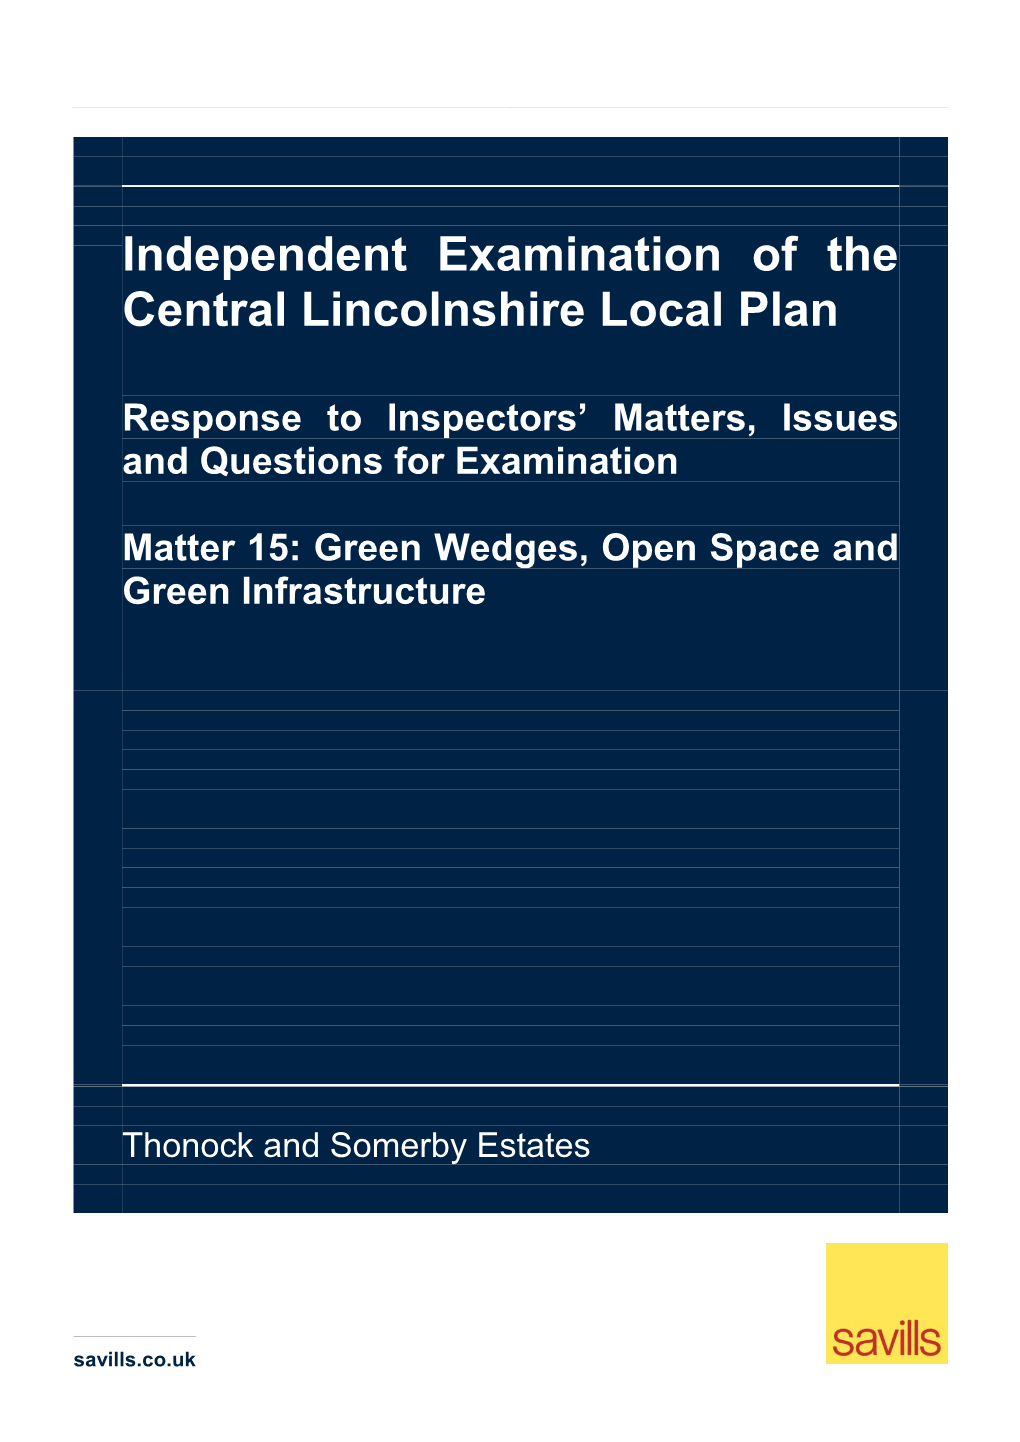 Independent Examination of the Central Lincolnshire Local Plan